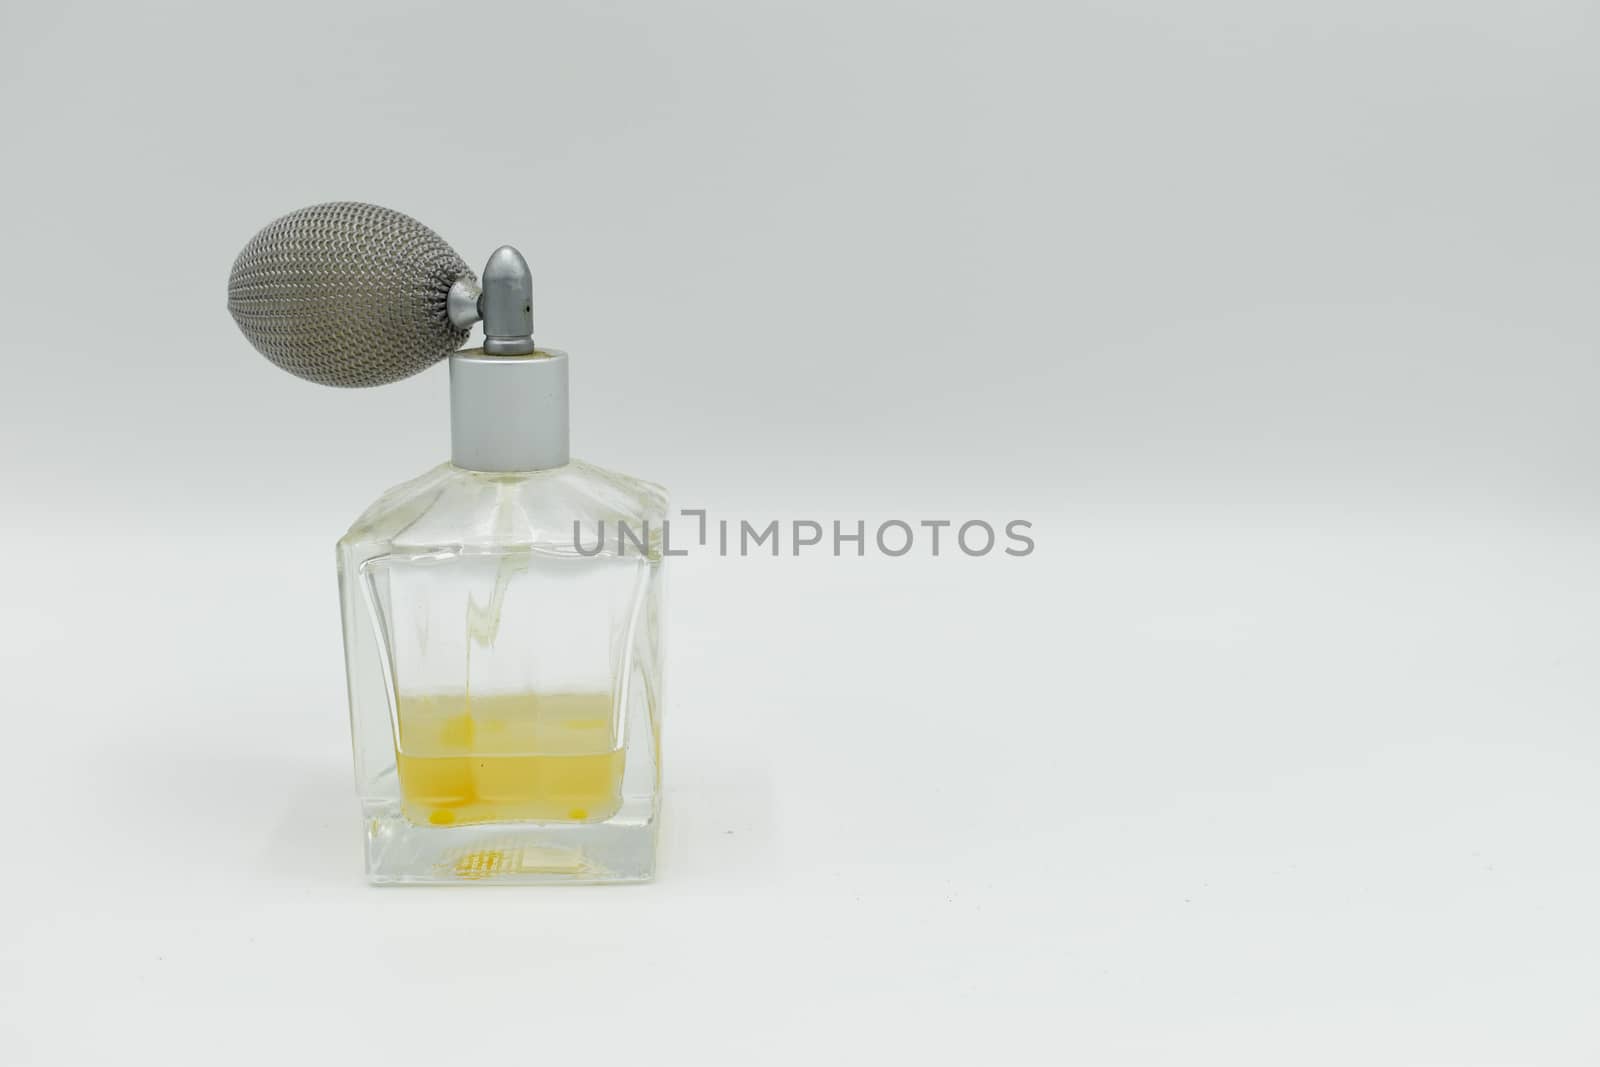 Perfume sprayer isolated on white background by benentaylor